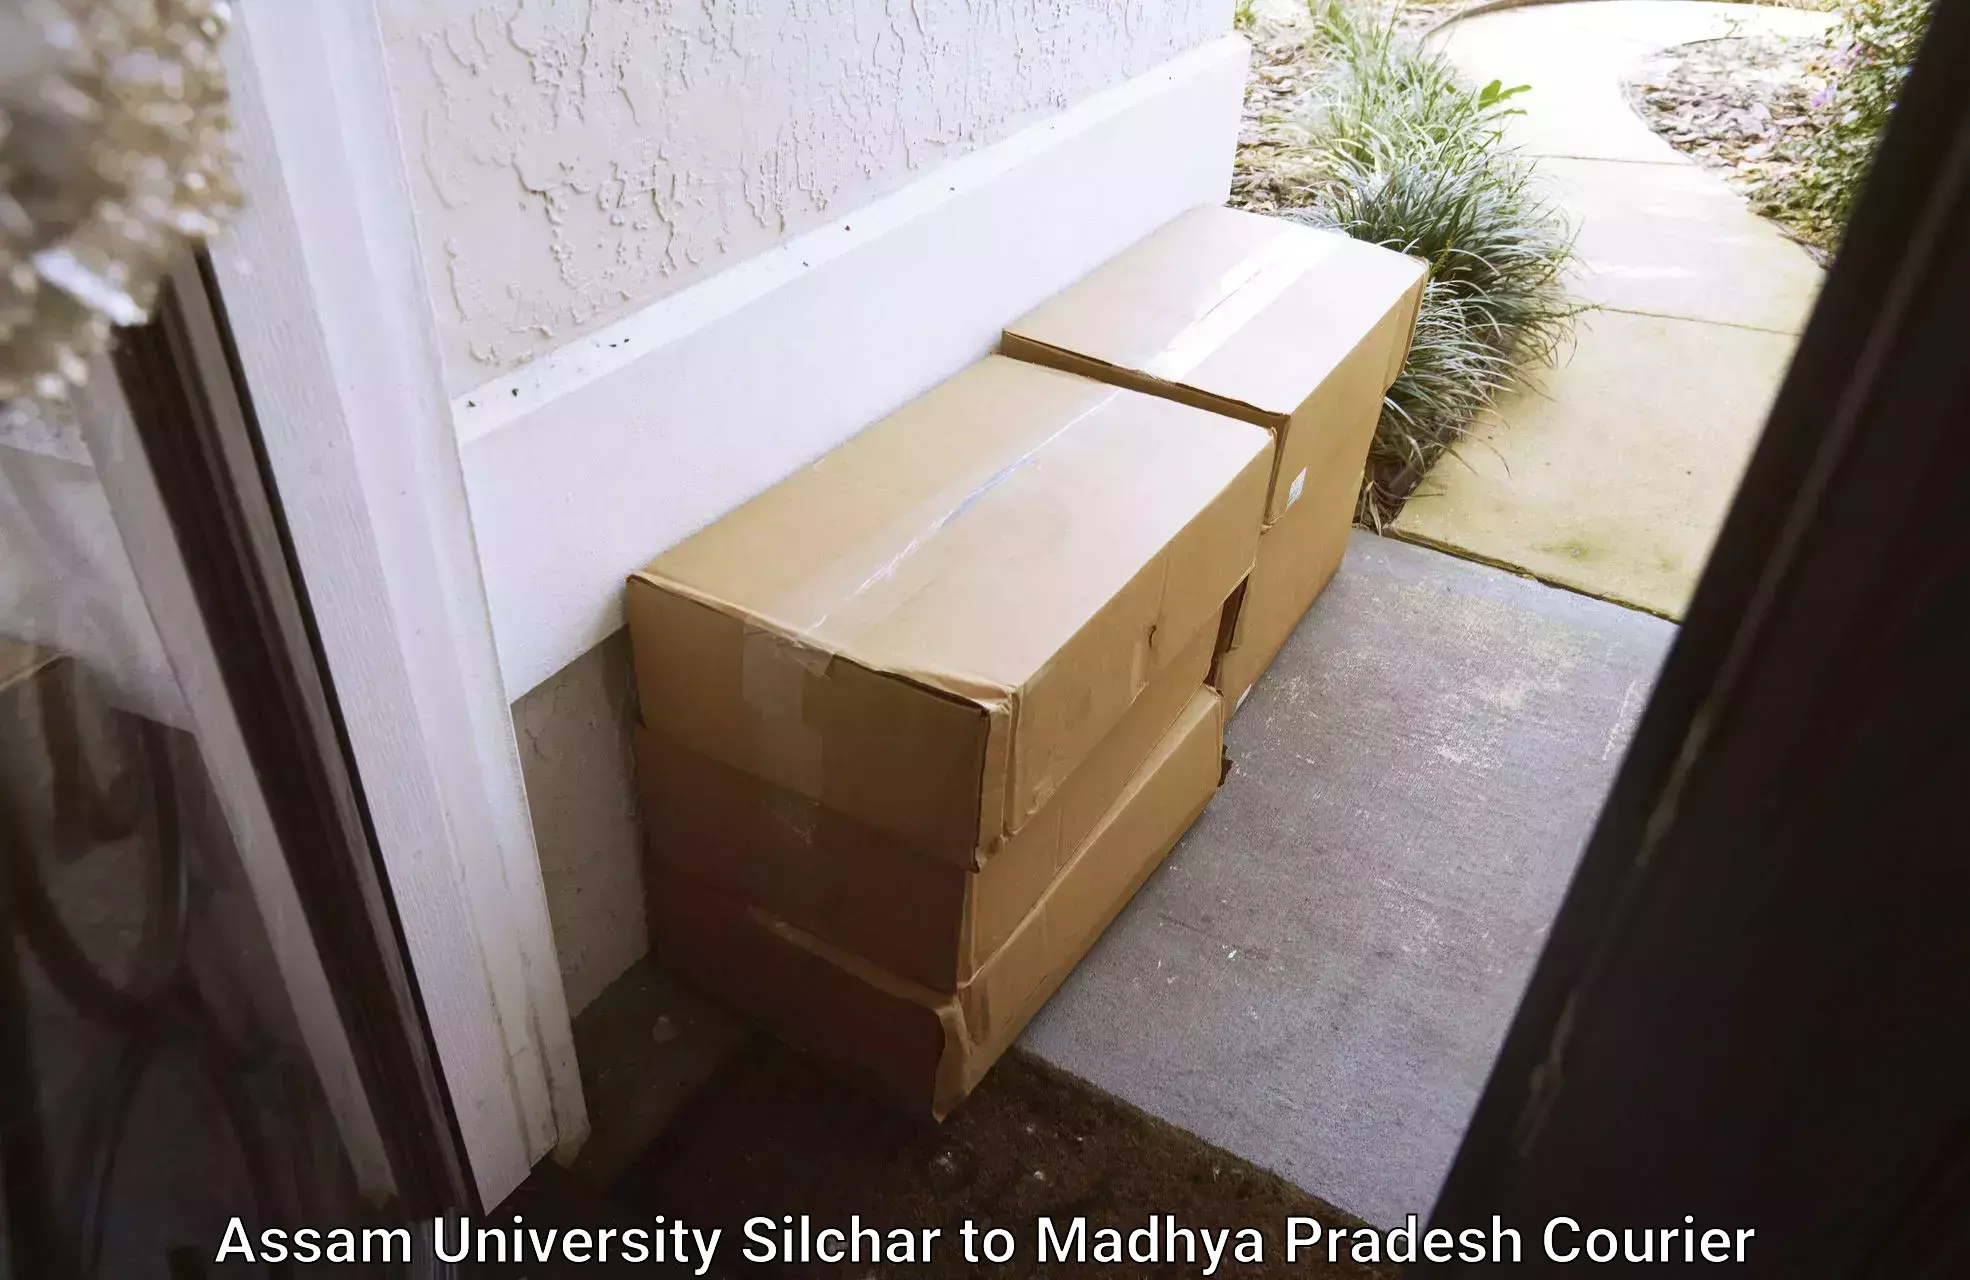 Express courier facilities Assam University Silchar to Madwas